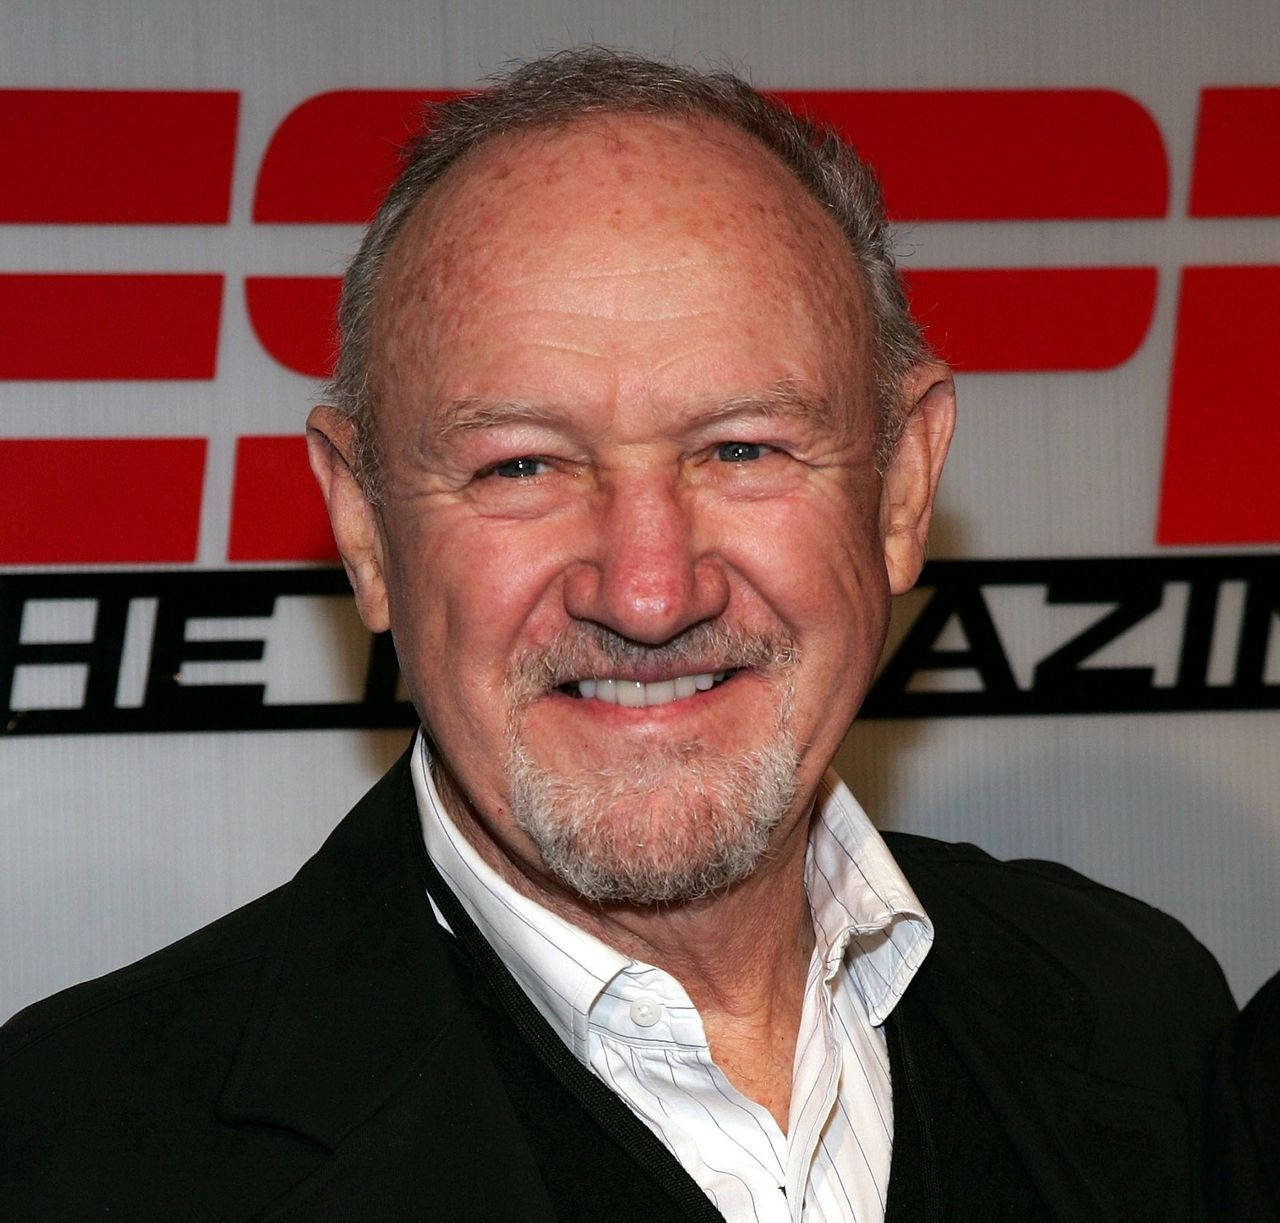 Genehackman På Espn (as Is, No Translation Needed As Espn Is A Universally Recognized Brand Name) Wallpaper